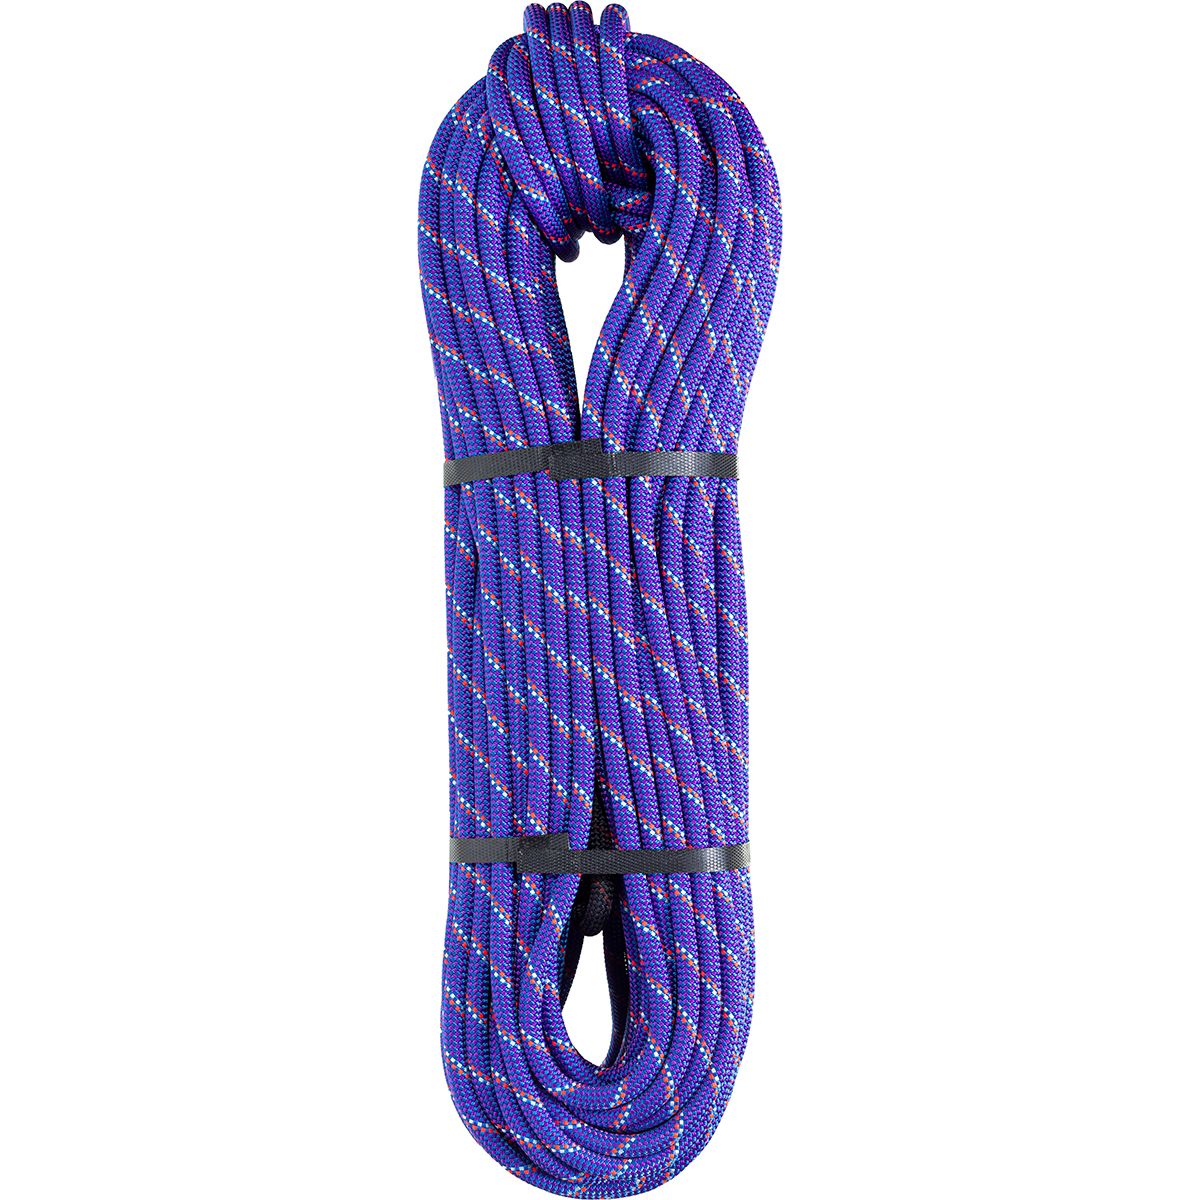 Edelweiss Power Unicore EverDry 10mm Climbing Rope